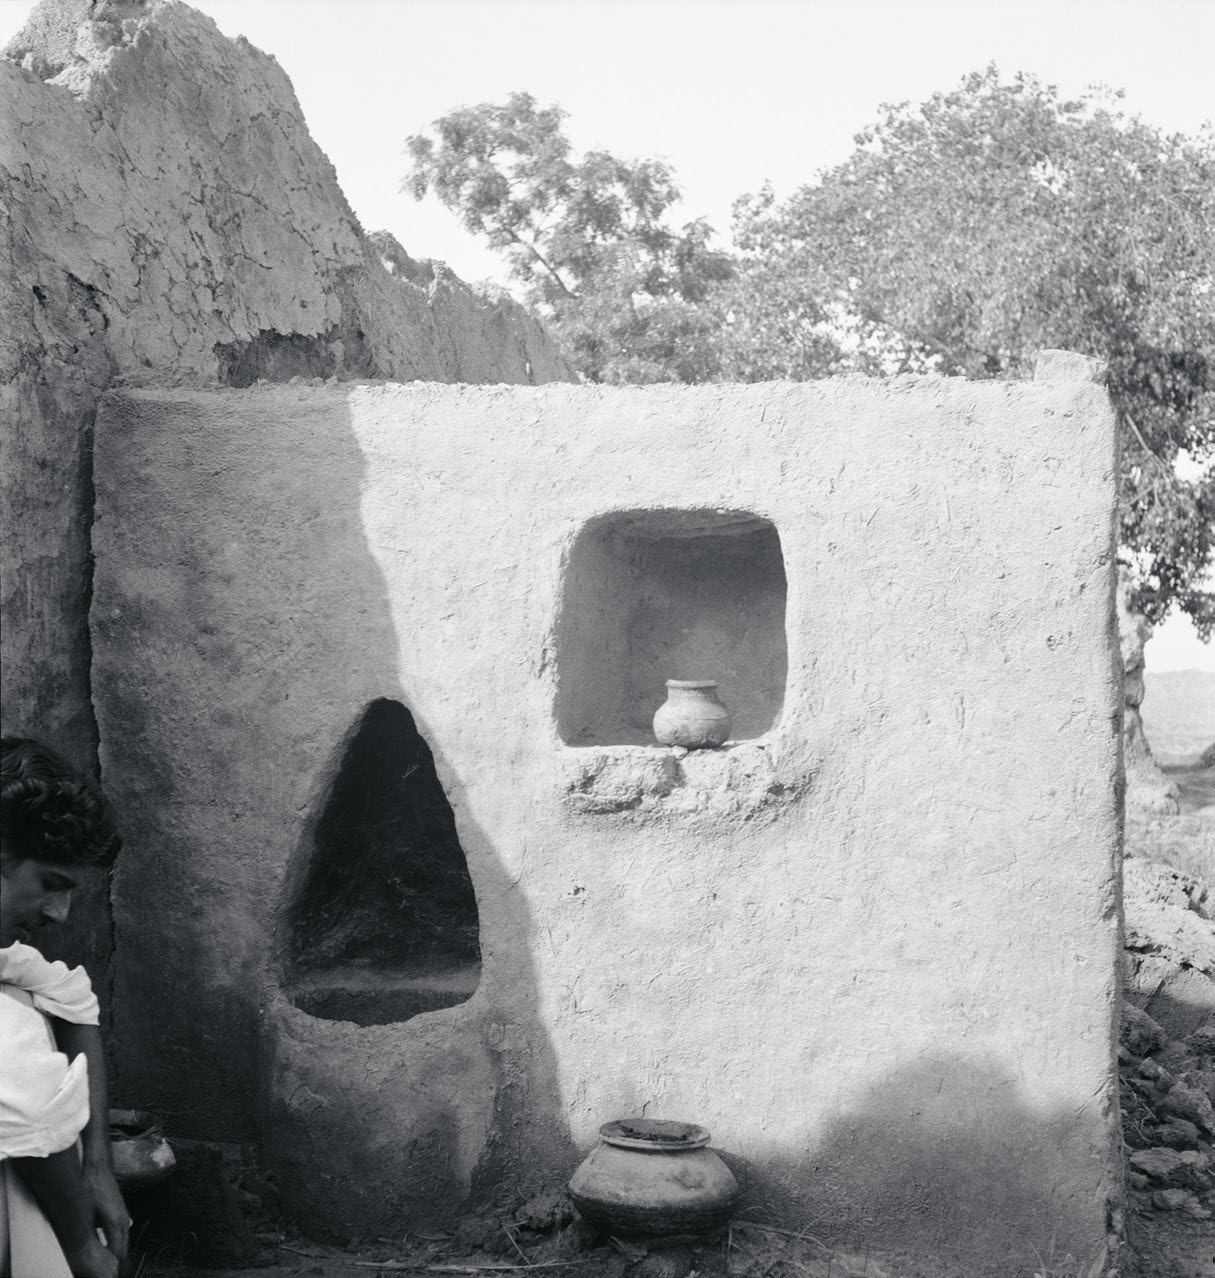 Chandigarh area, niches dug in the pi pisé wall to hold potteries and to create a rustic oven